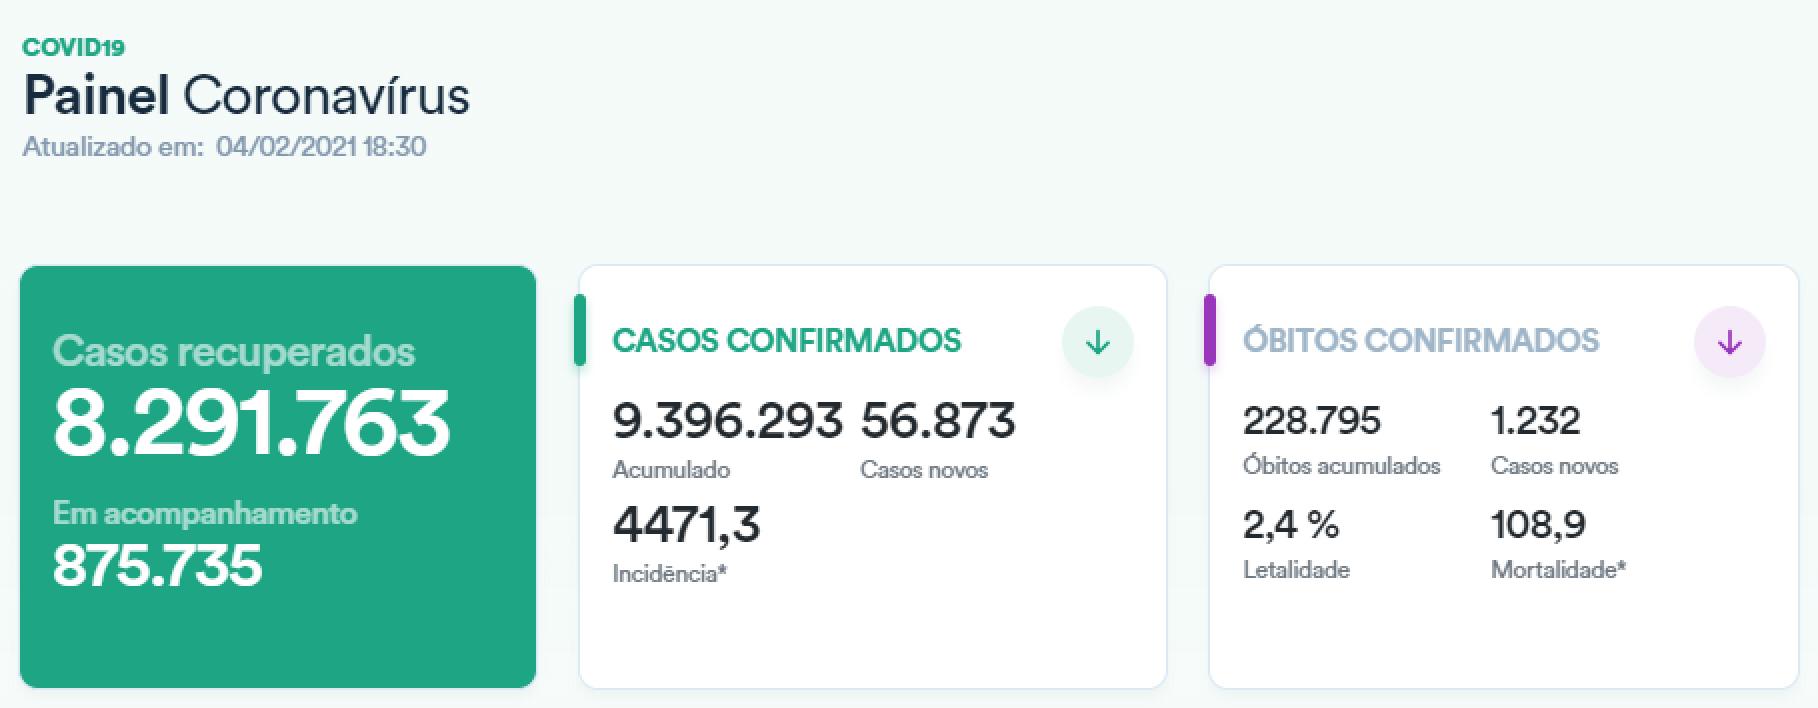 The cumulative number of confirmed cases of COVID-19 in Brazil exceeds 9.39 million, and the epidemic situation is still grim.